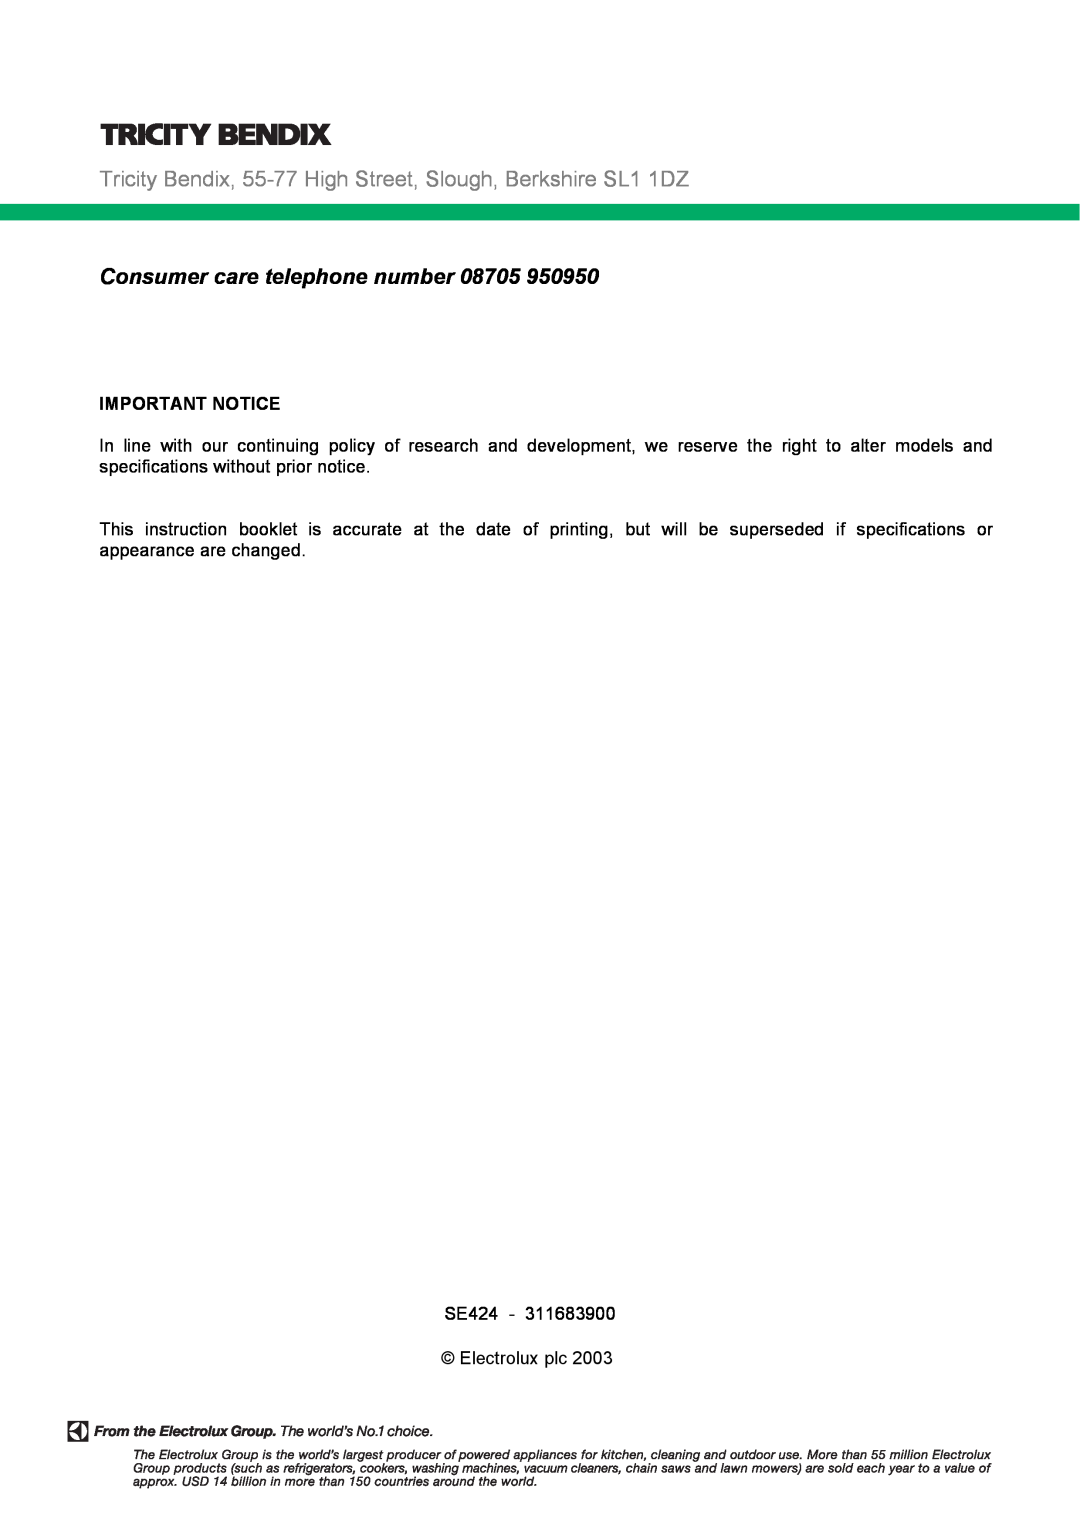 Tricity Bendix SE424 installation instructions Consumer care telephone number, Important Notice 